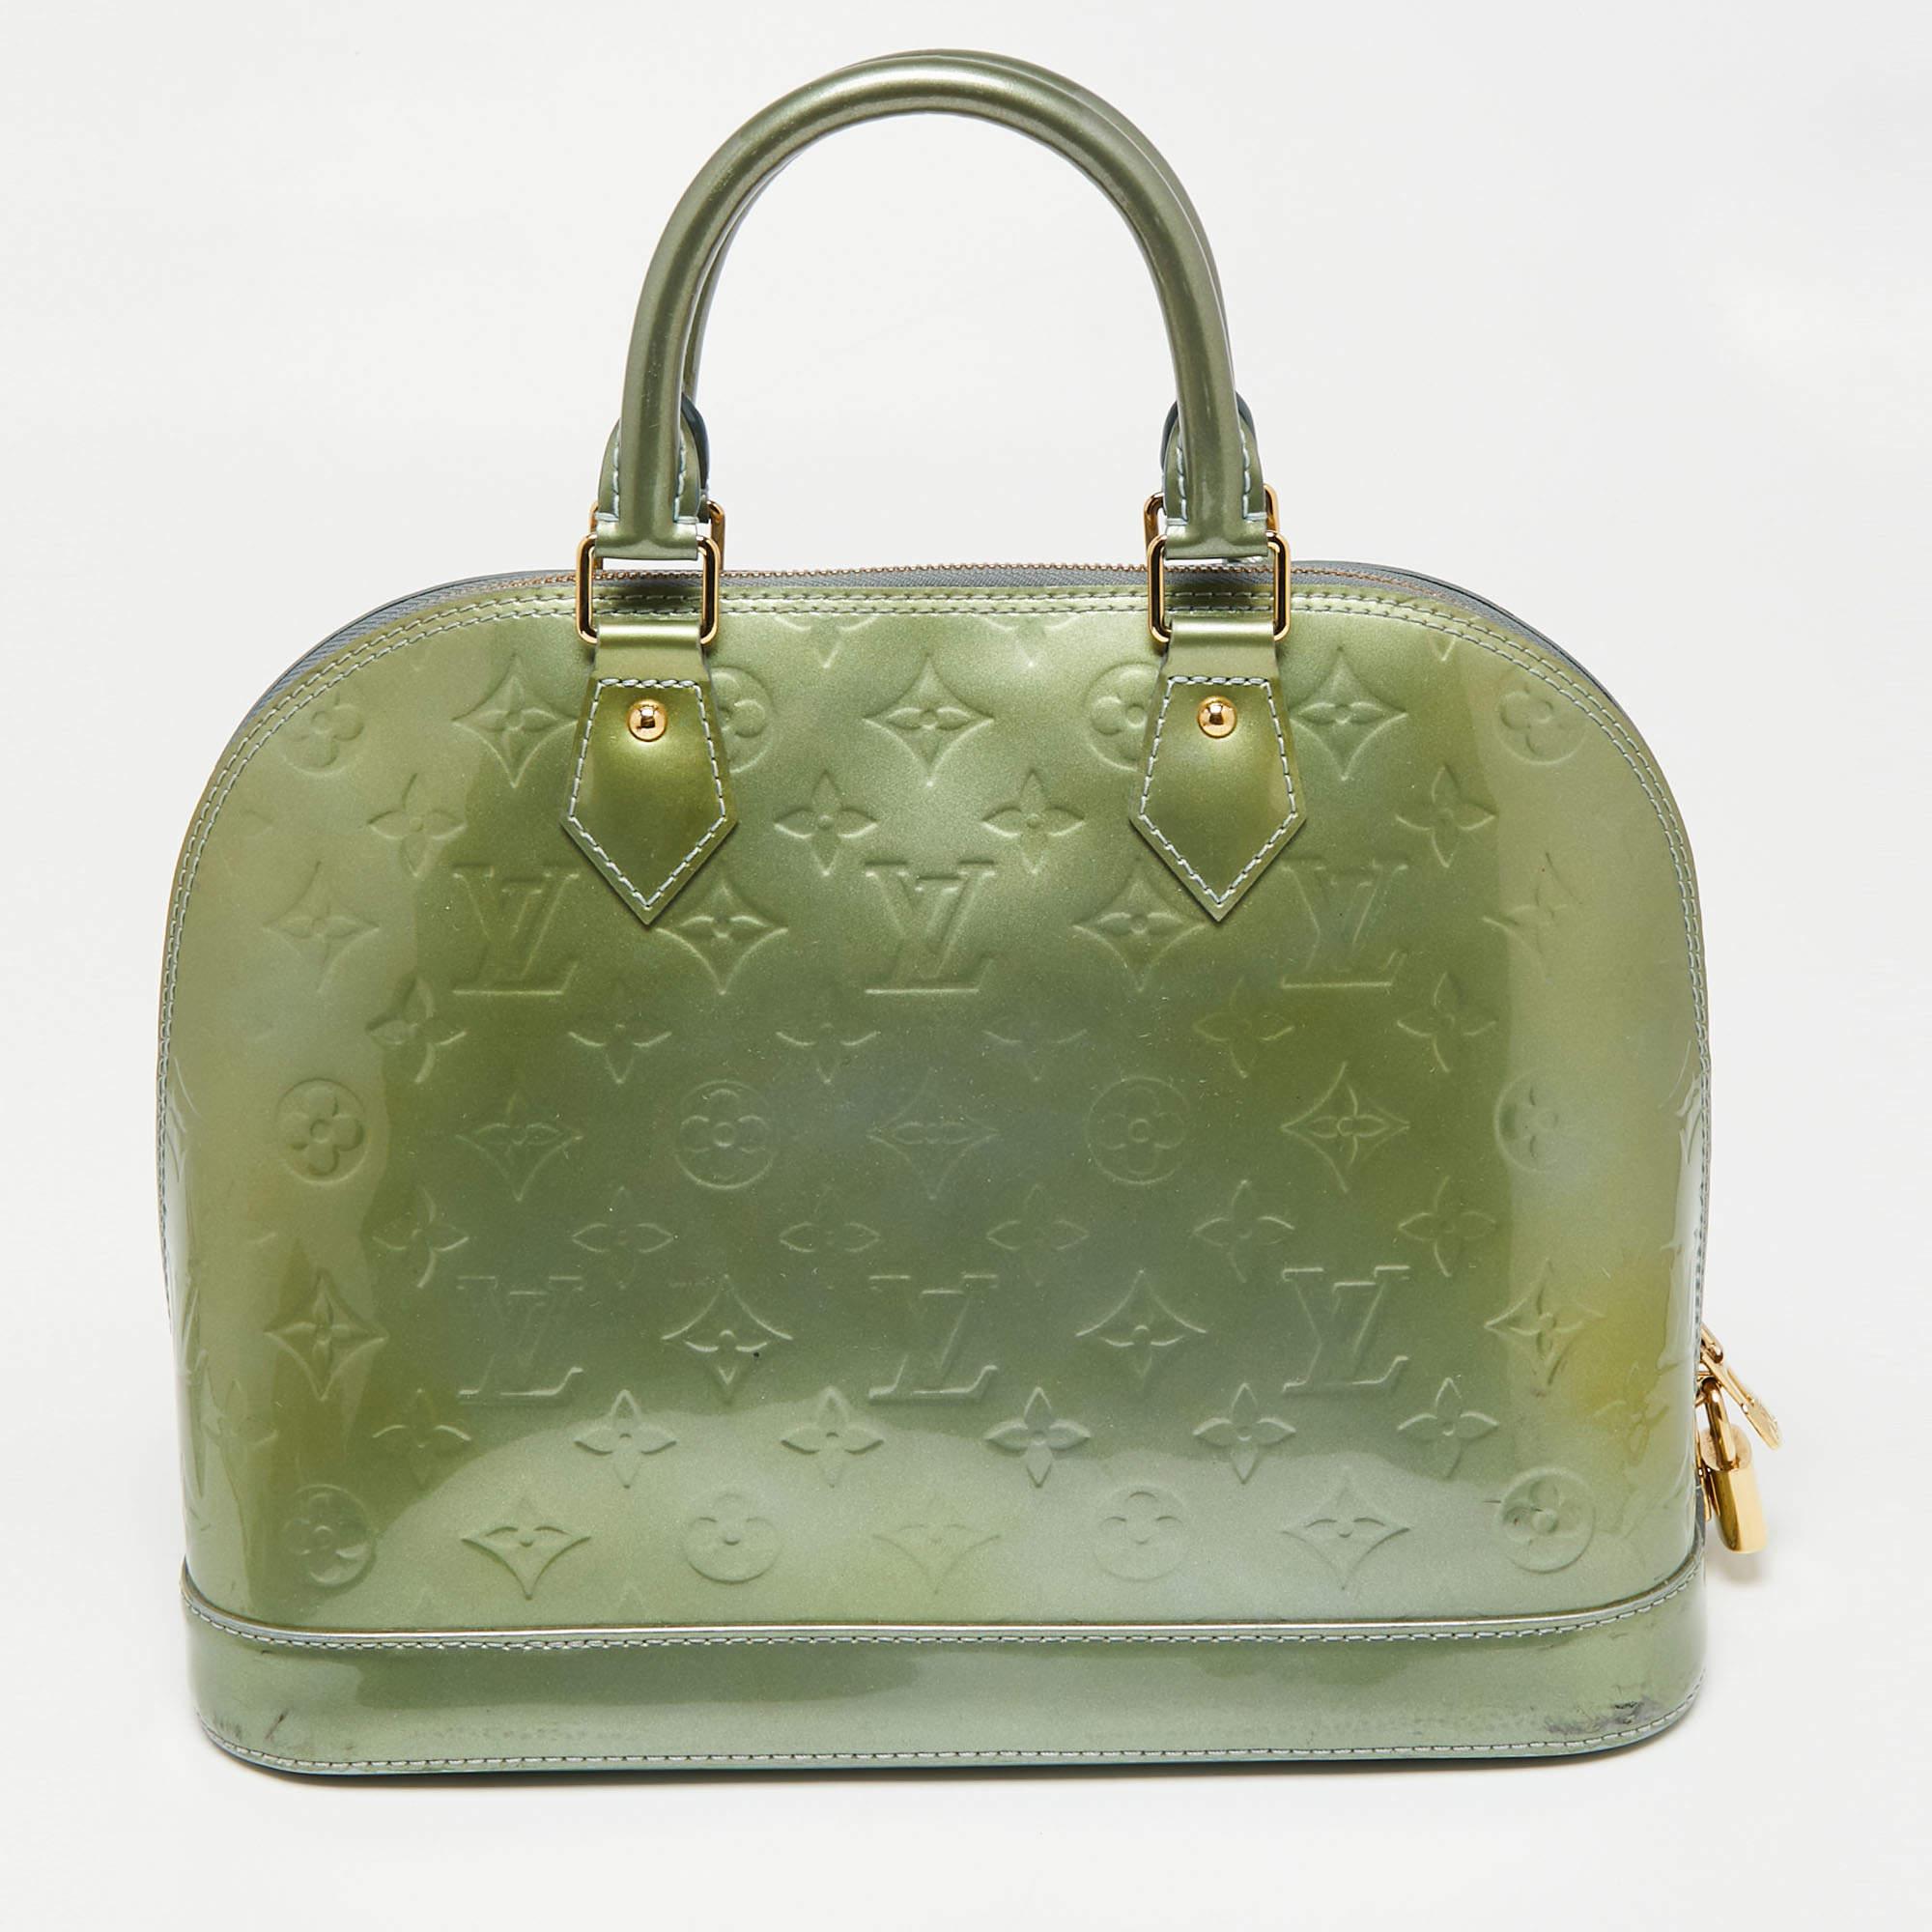 Out of all the irresistible handbags from Louis Vuitton, the Alma is the most structured one. First introduced in 1934 by Gaston-Louis Vuitton, the Alma is a classic that has received love from icons. This piece comes crafted from Vernis leather,